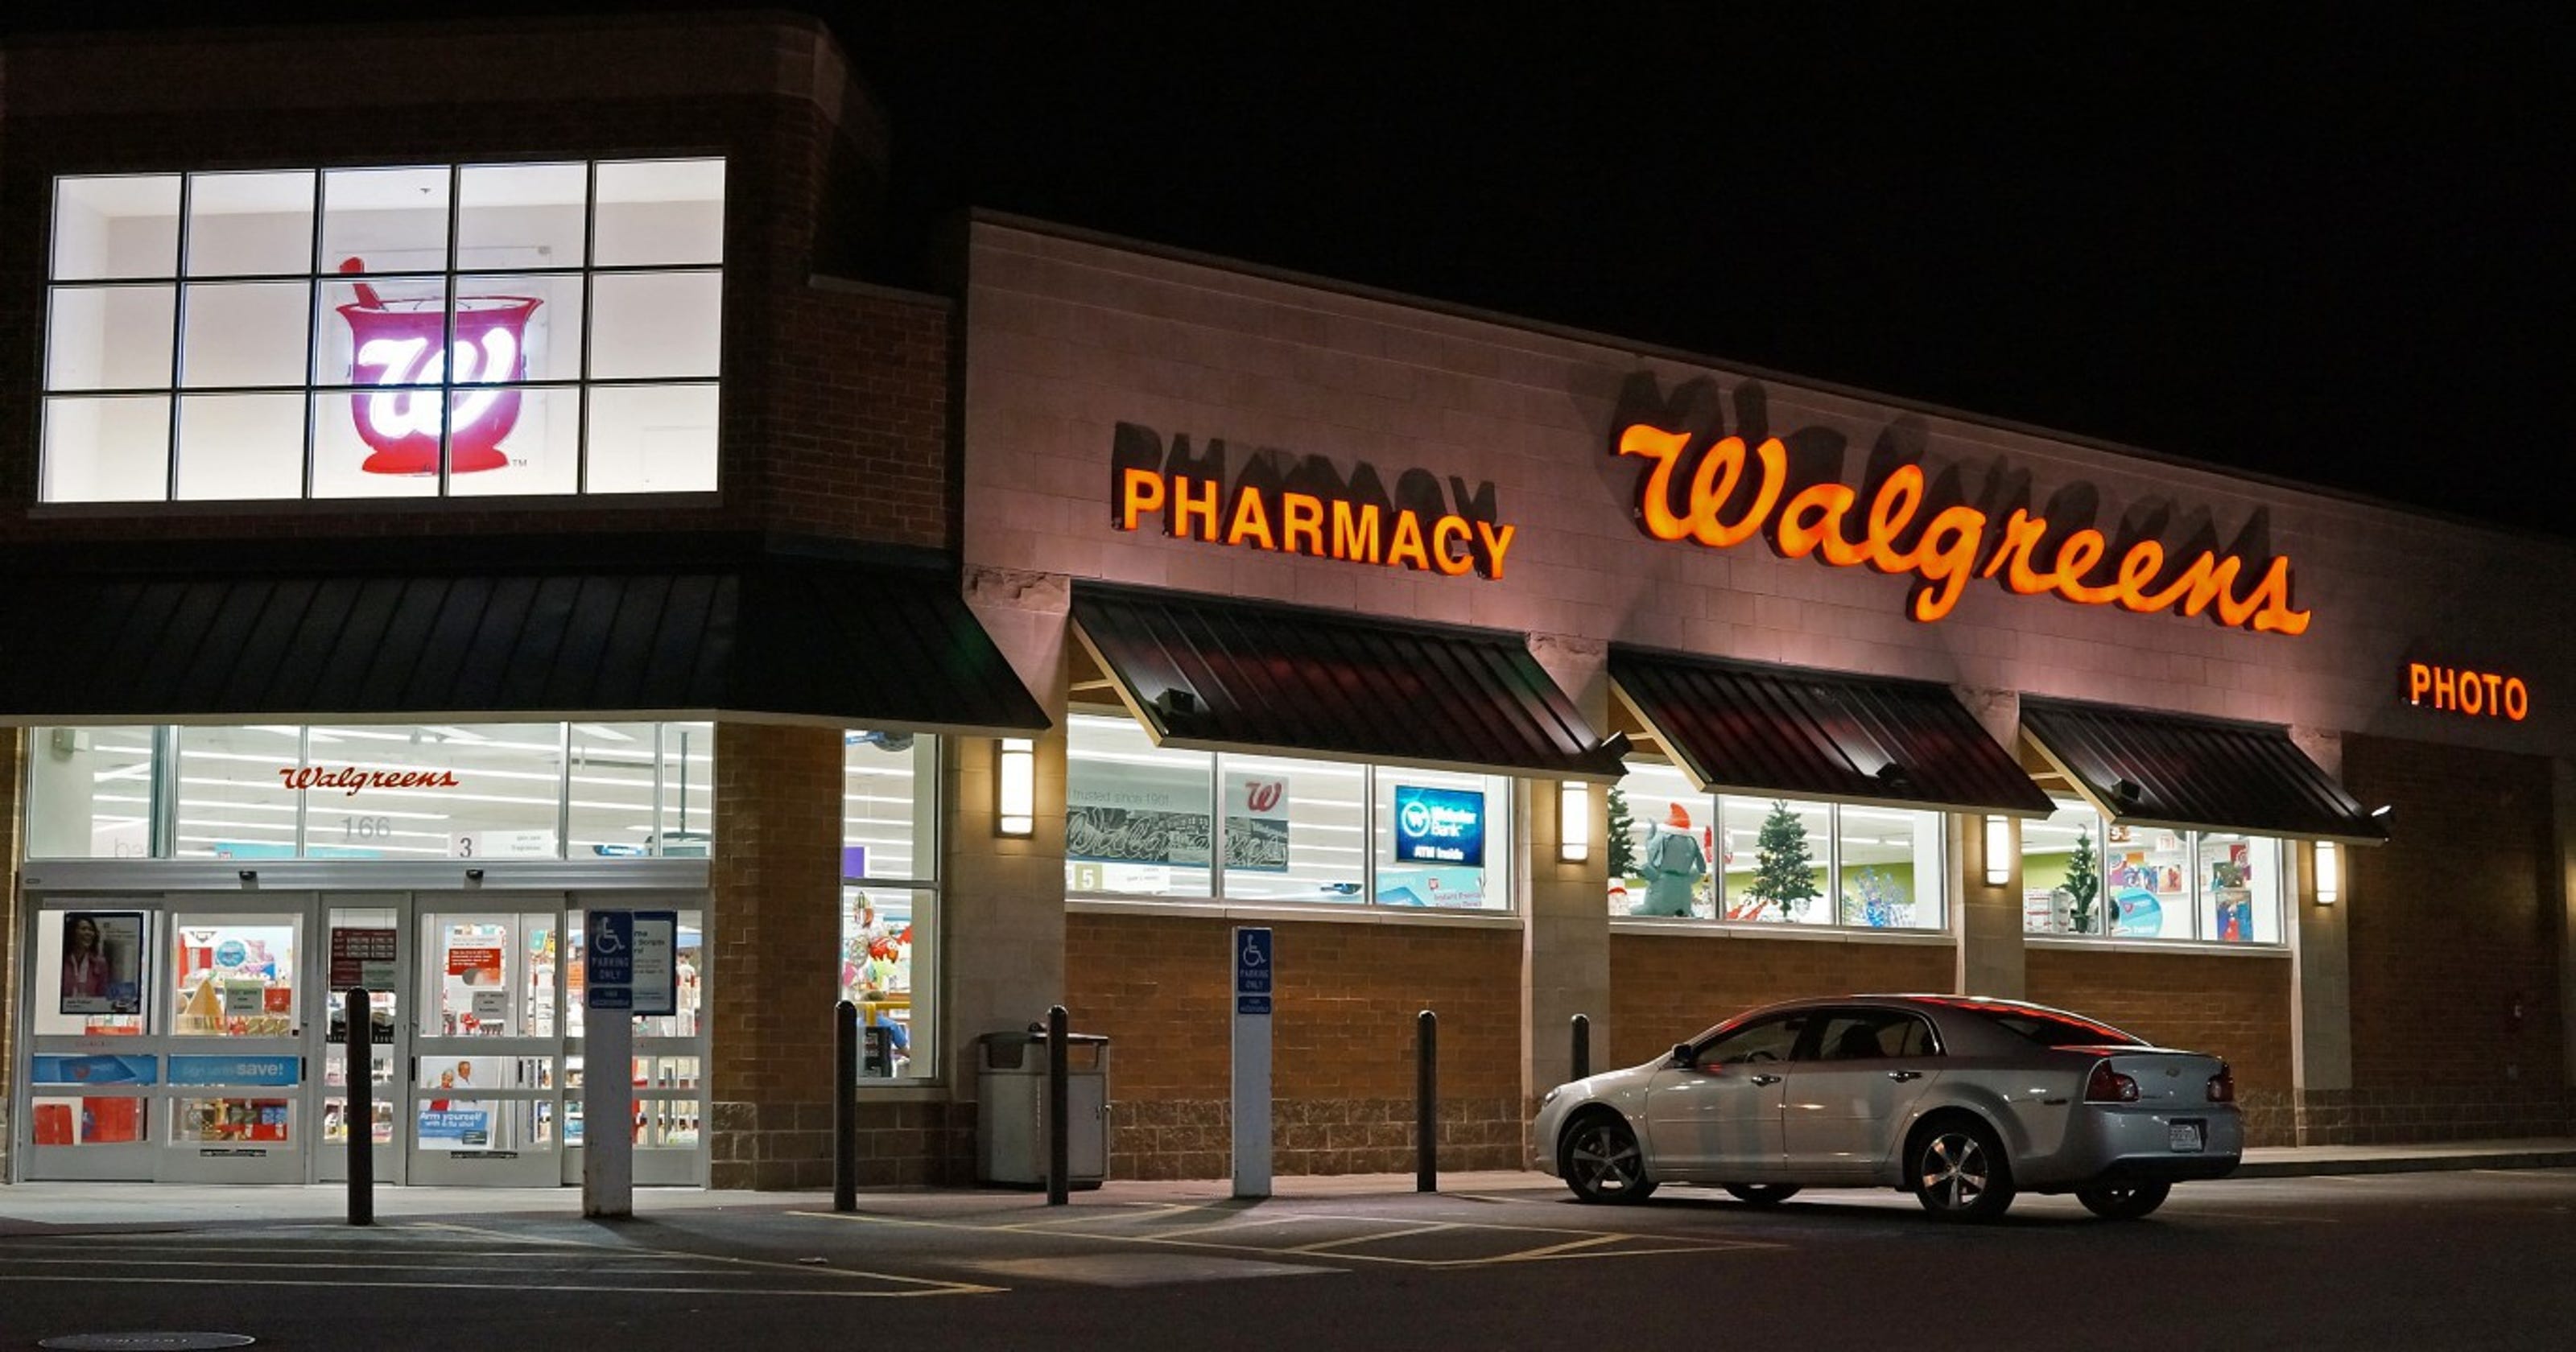 Walgreens launching next-day prescription delivery service with FedEx